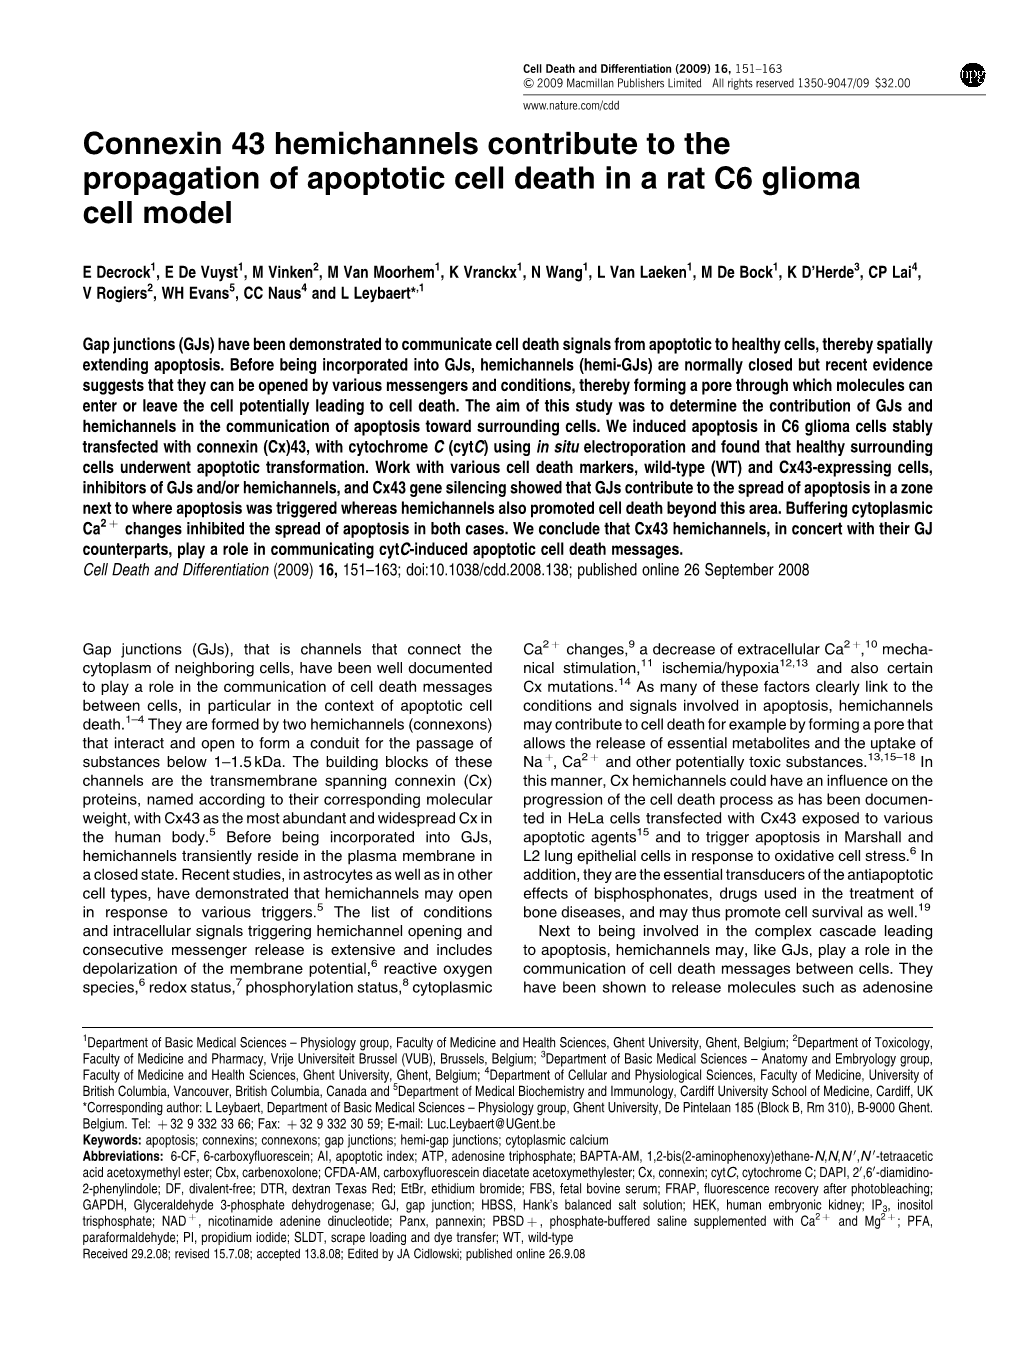 Connexin 43 Hemichannels Contribute to the Propagation of Apoptotic Cell Death in a Rat C6 Glioma Cell Model